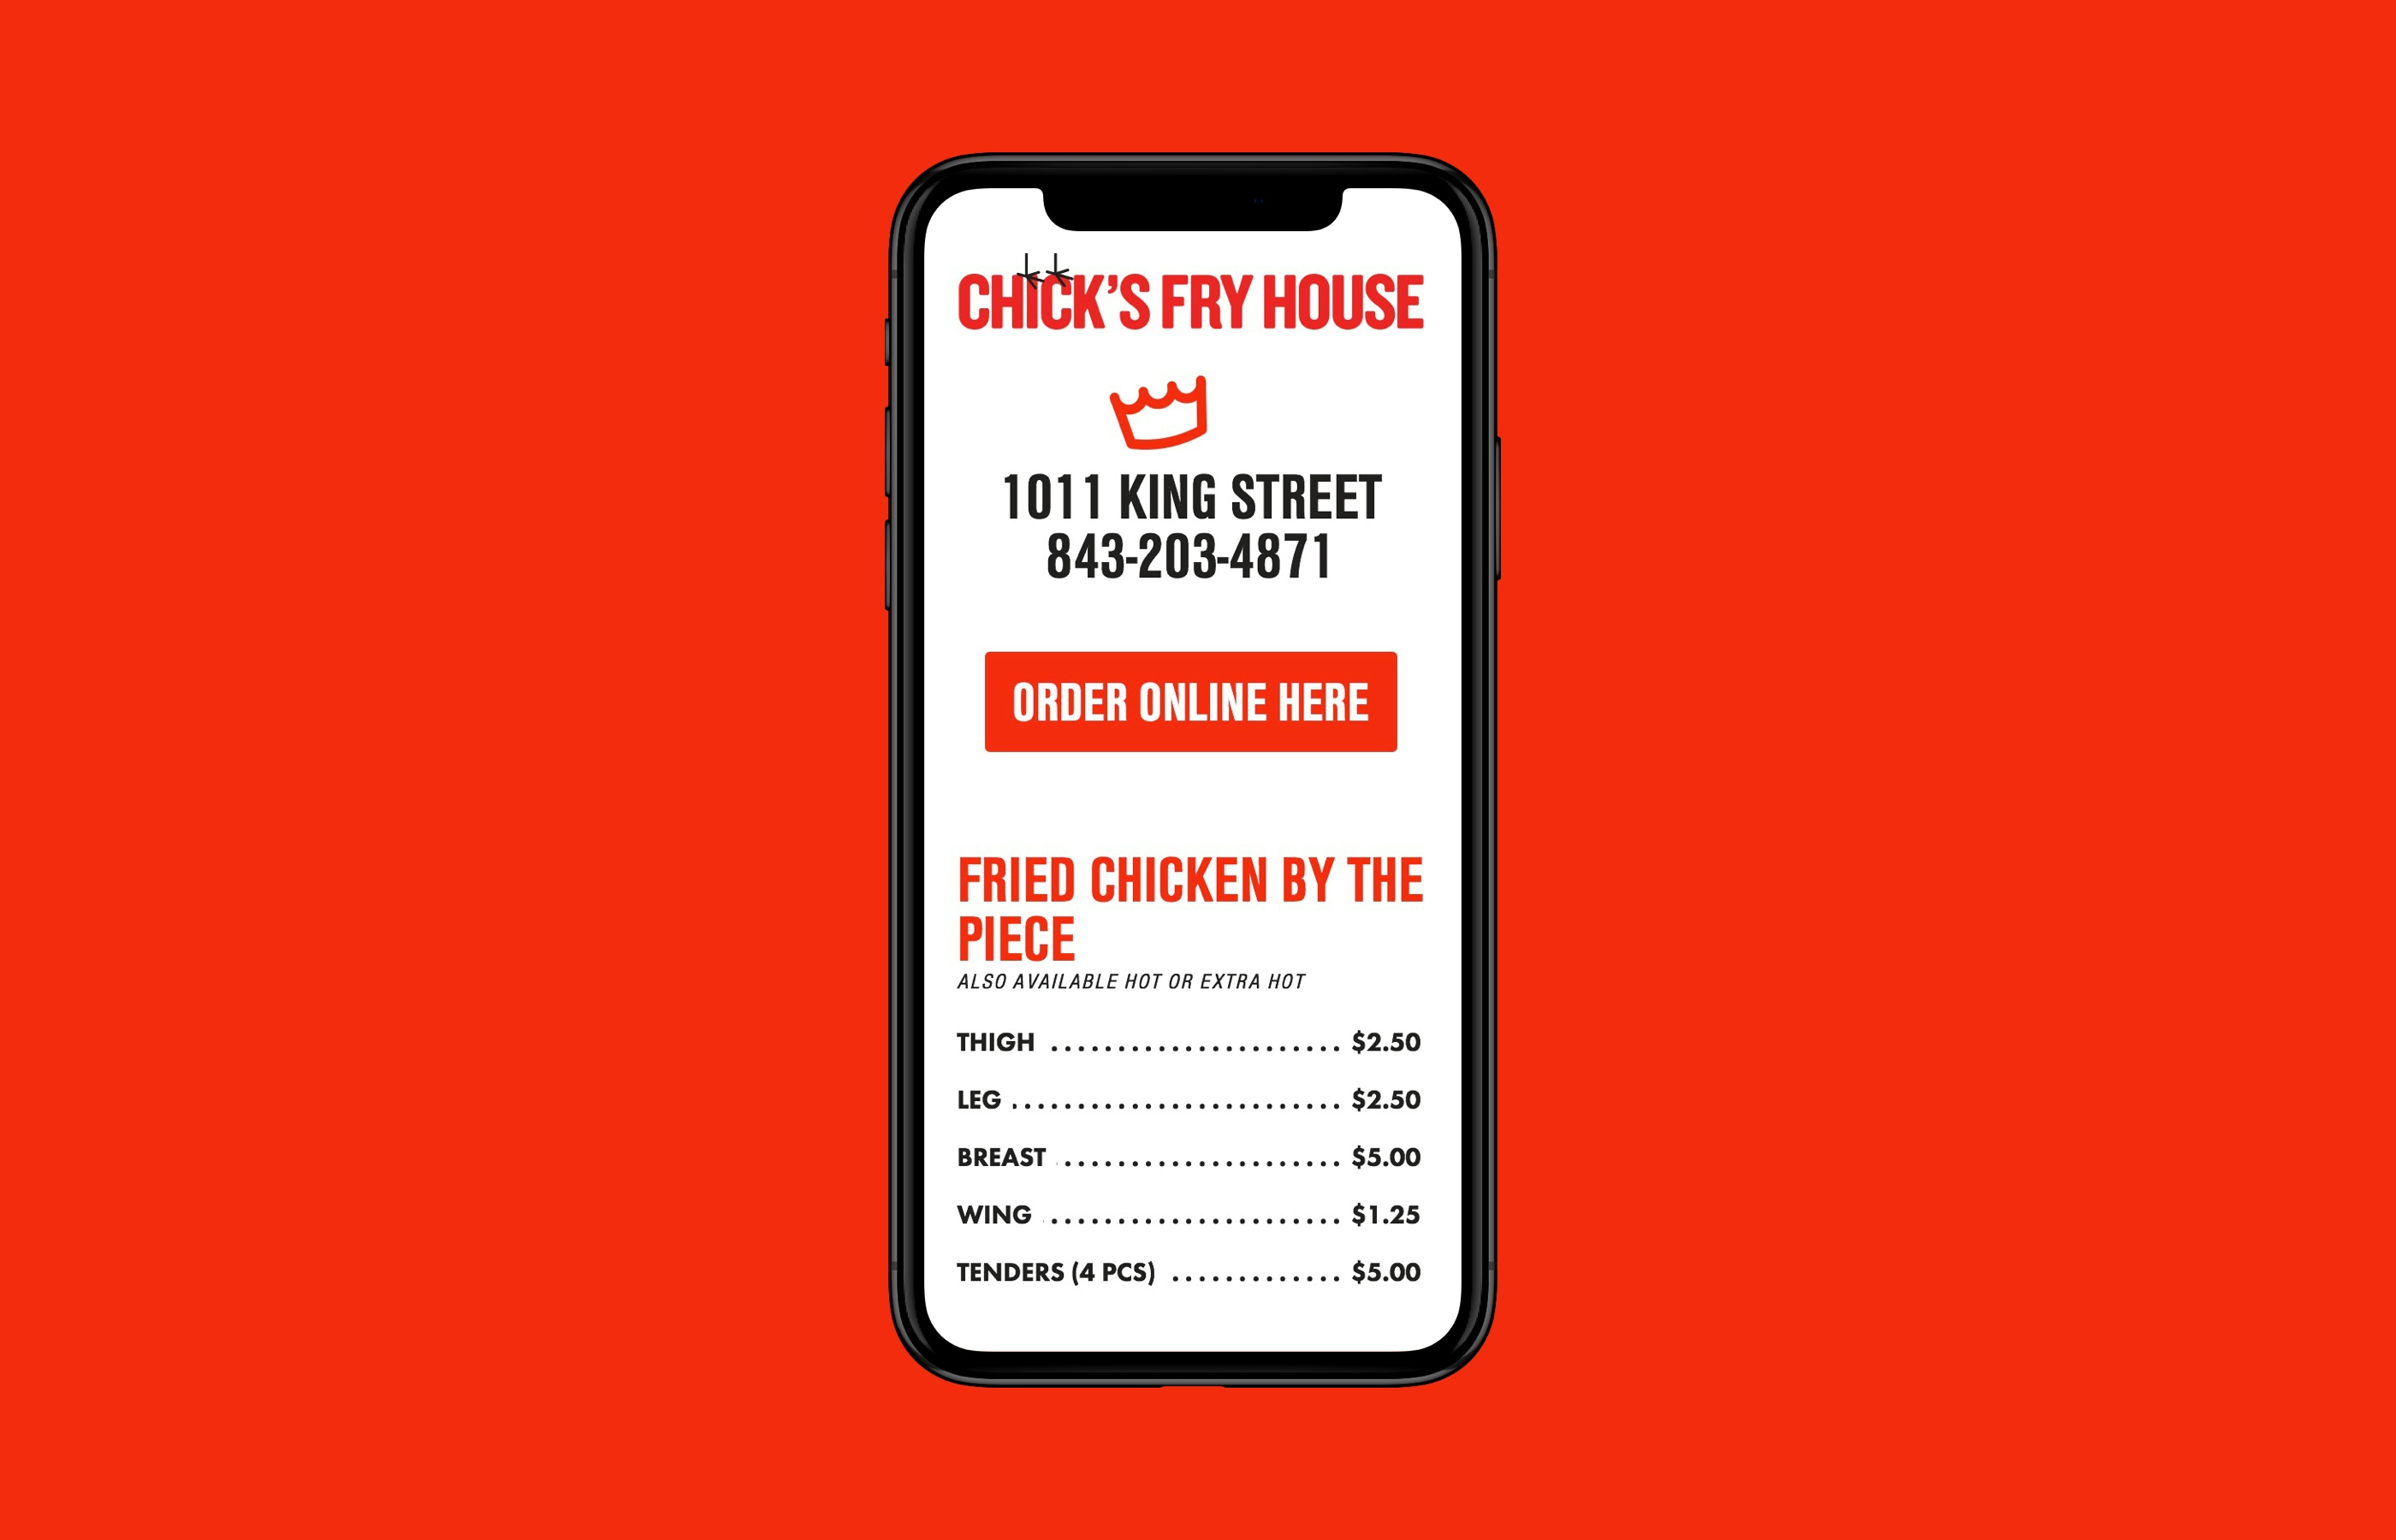 Chick's Fry House mobile website